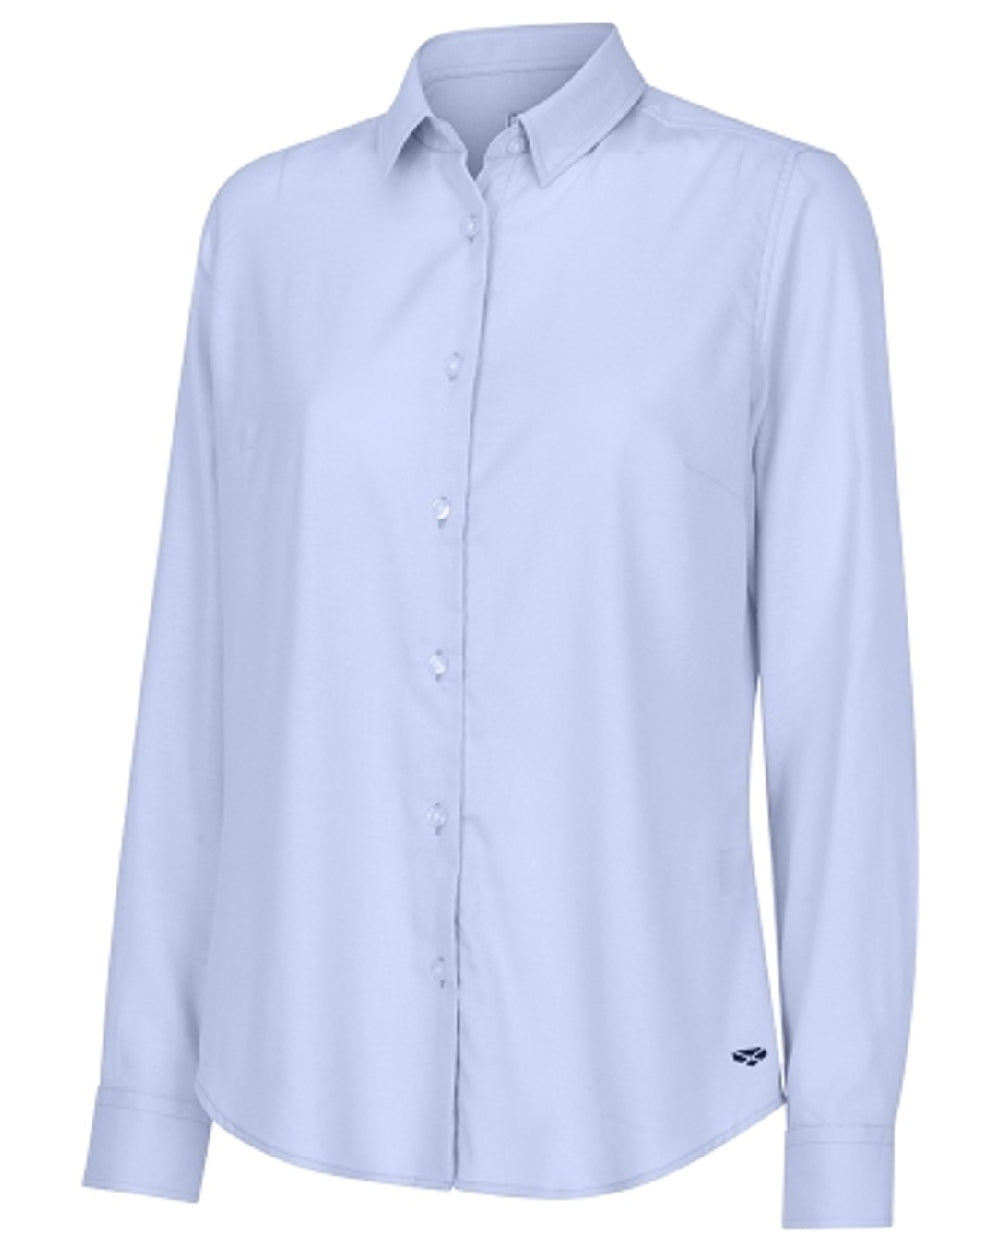 Blue coloured Hoggs of Fife Callie Twill Ladies Check Shirt on white background 